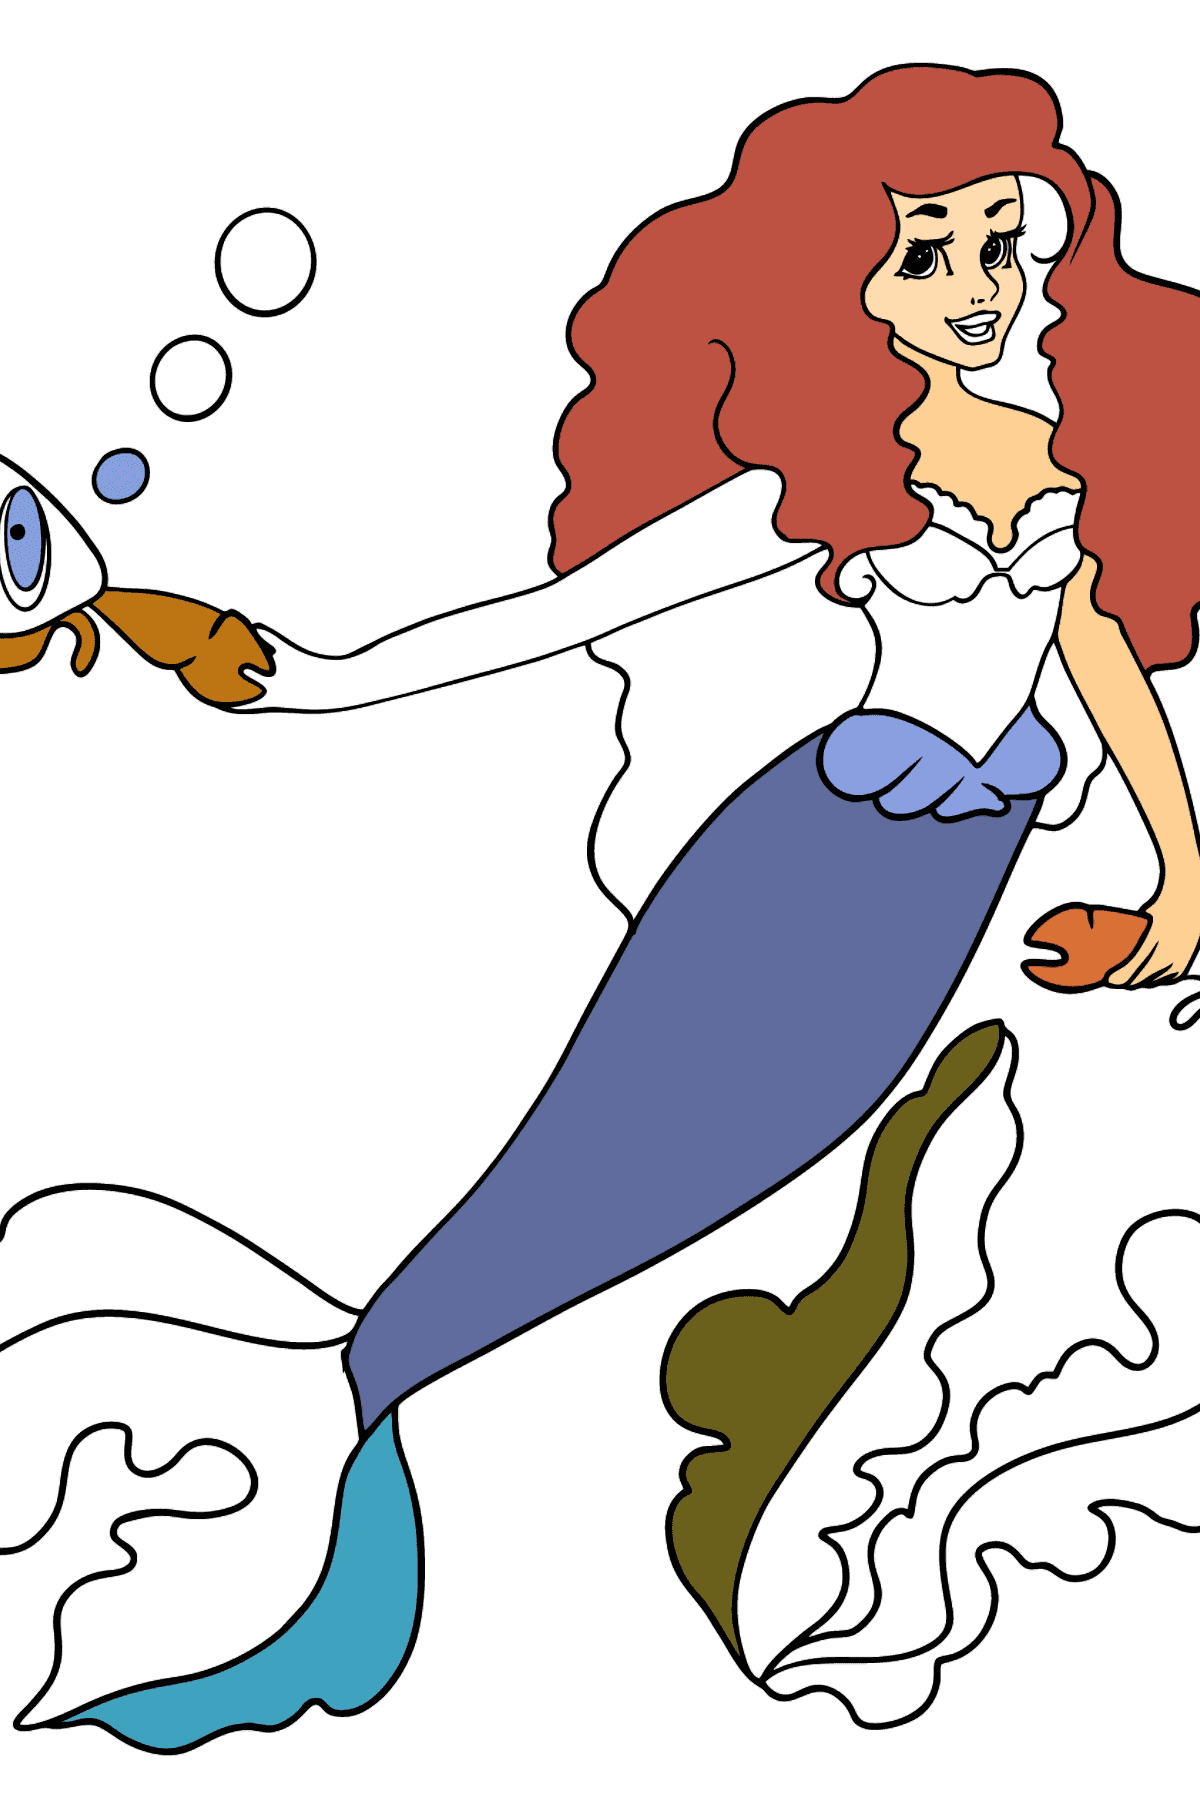 Coloring Page Mermaid and two crabs - Coloring Pages for Kids